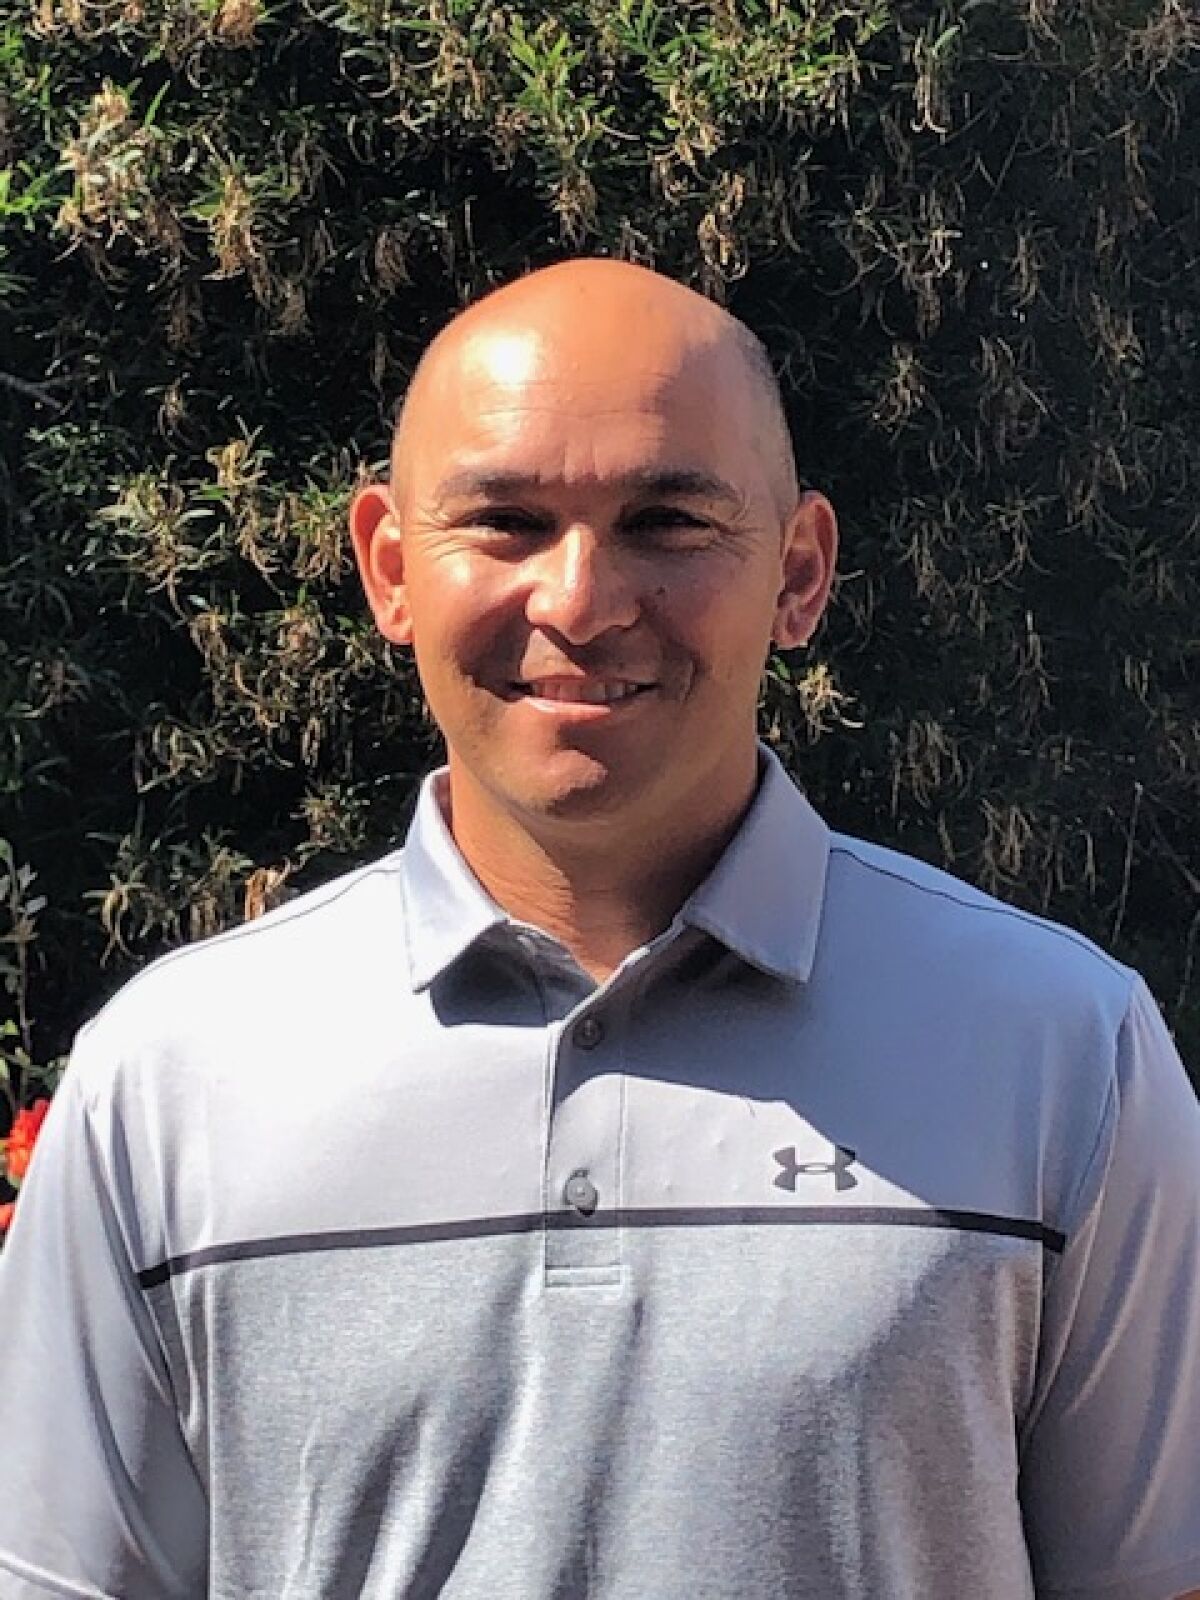 John Chanfreau is the new general manager of the Rancho Santa Fe Tennis Club.